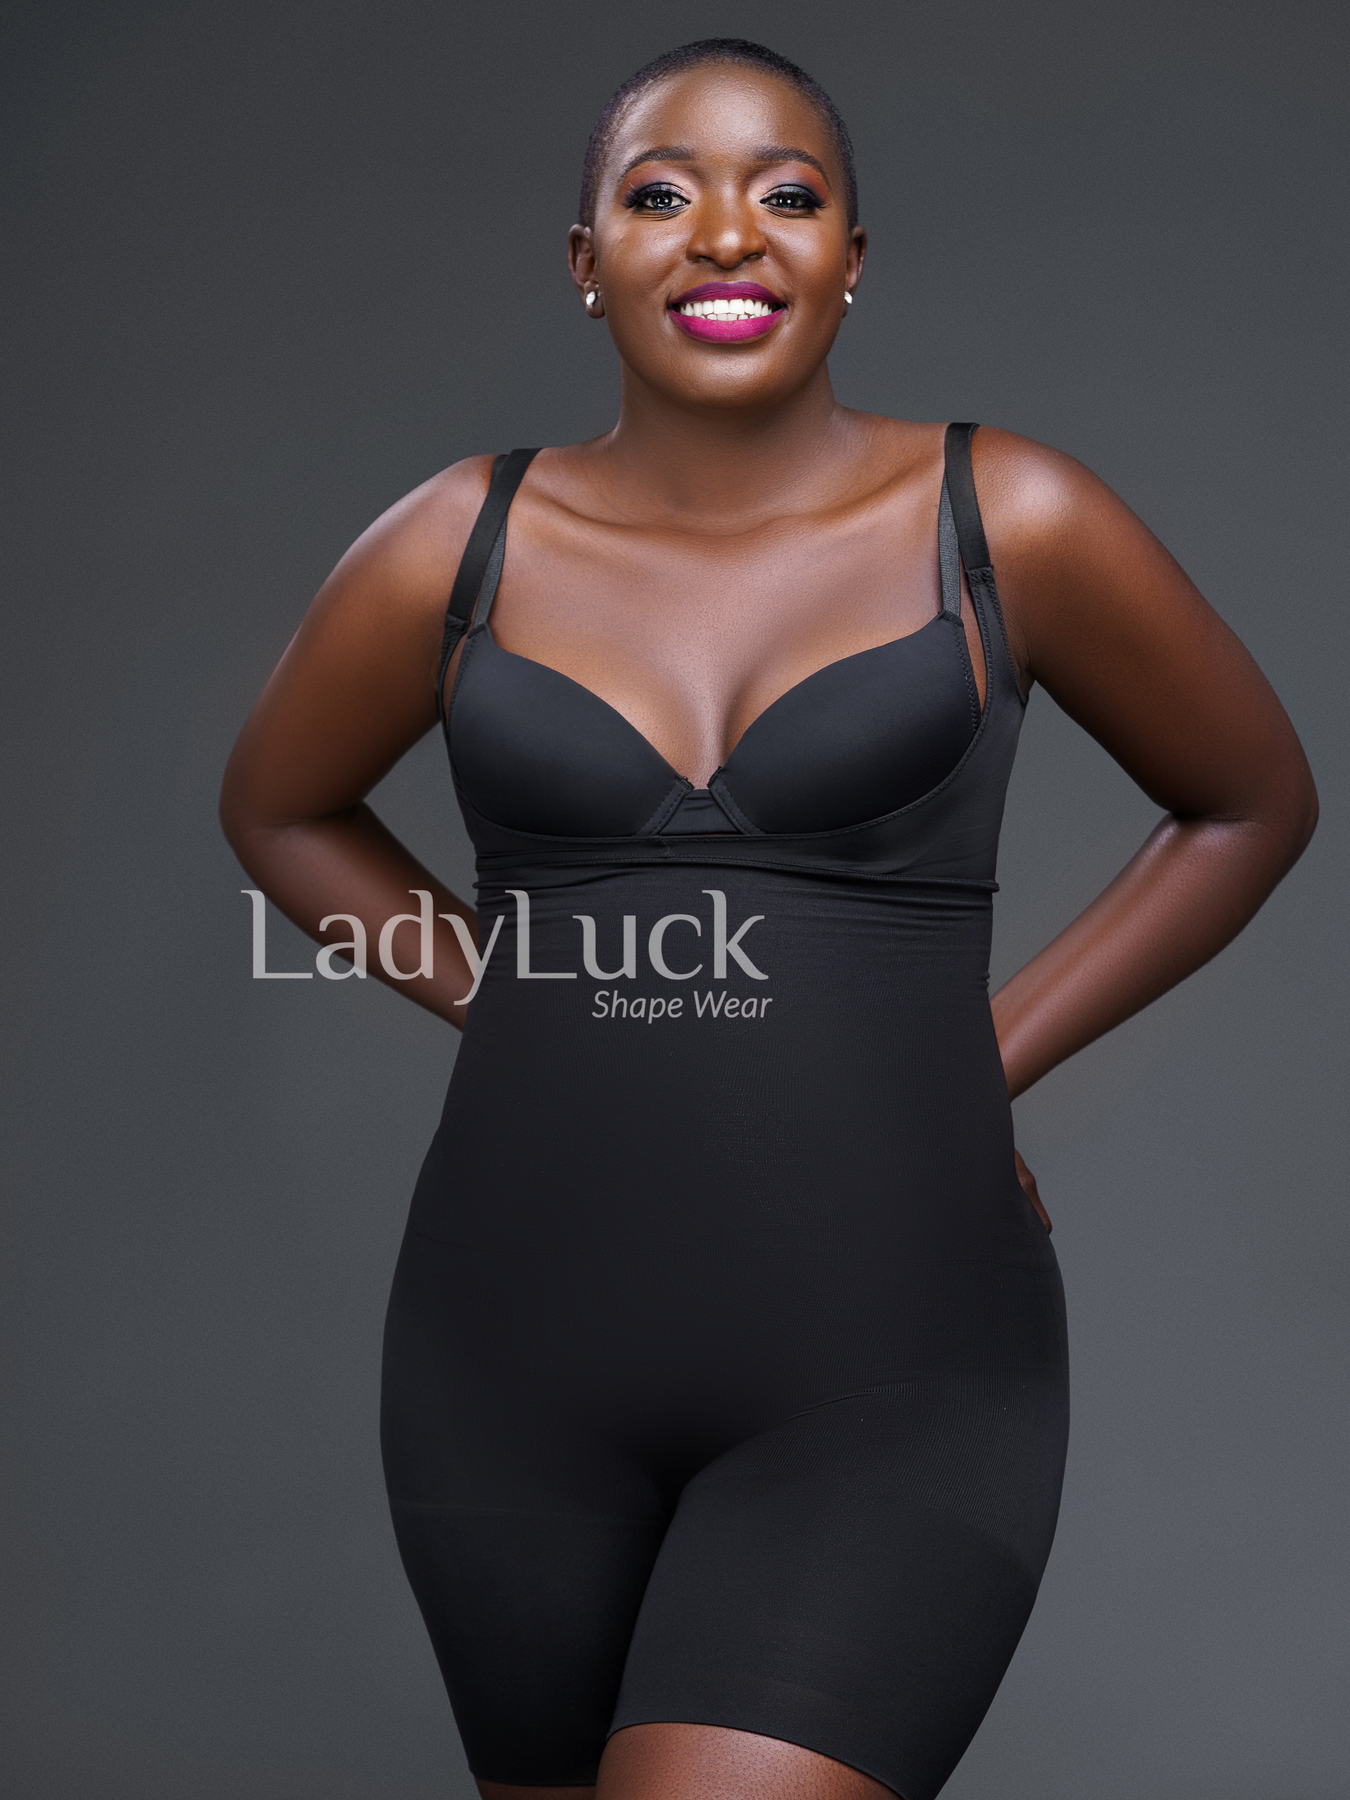 🚨 NEW BRAND ALERT - LADYLUCK SHAPEWEAR🚨 flaunt that beautiful silhouette!  with these ladyLuck Cupid Bodysuits 💃 Intro Offer - 10% OFF…